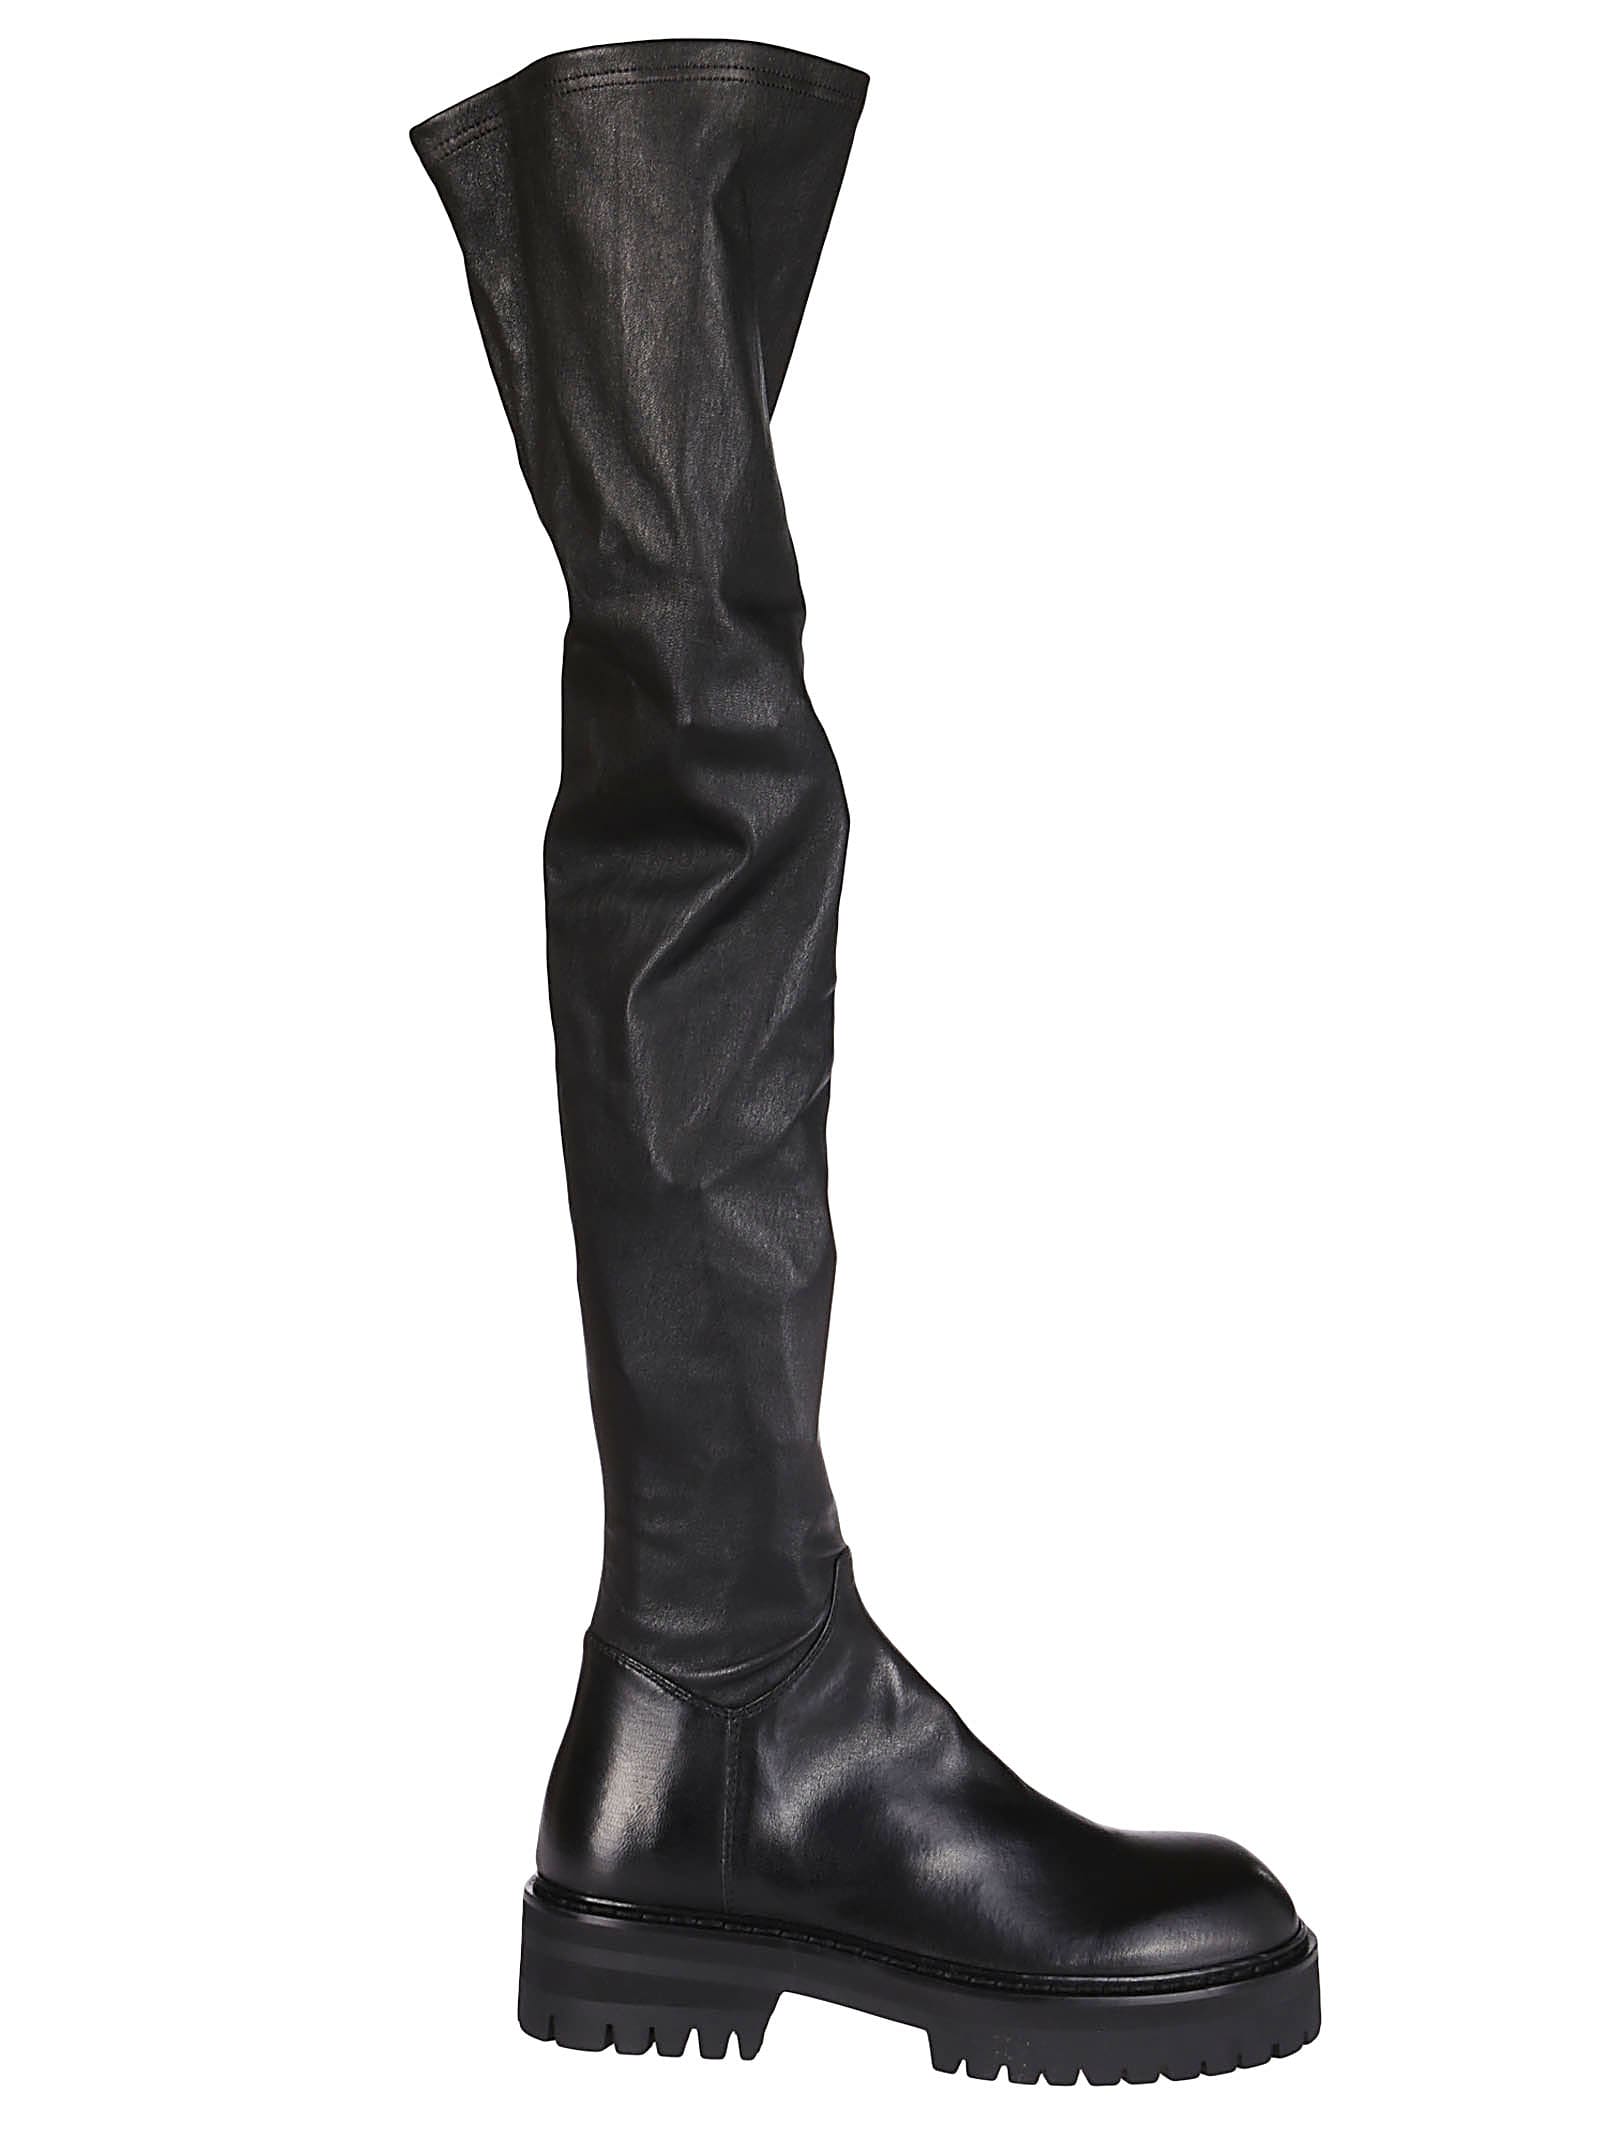 Ann Demeulemeester BLACK LEATHER THIGH-HIGH BOOTS